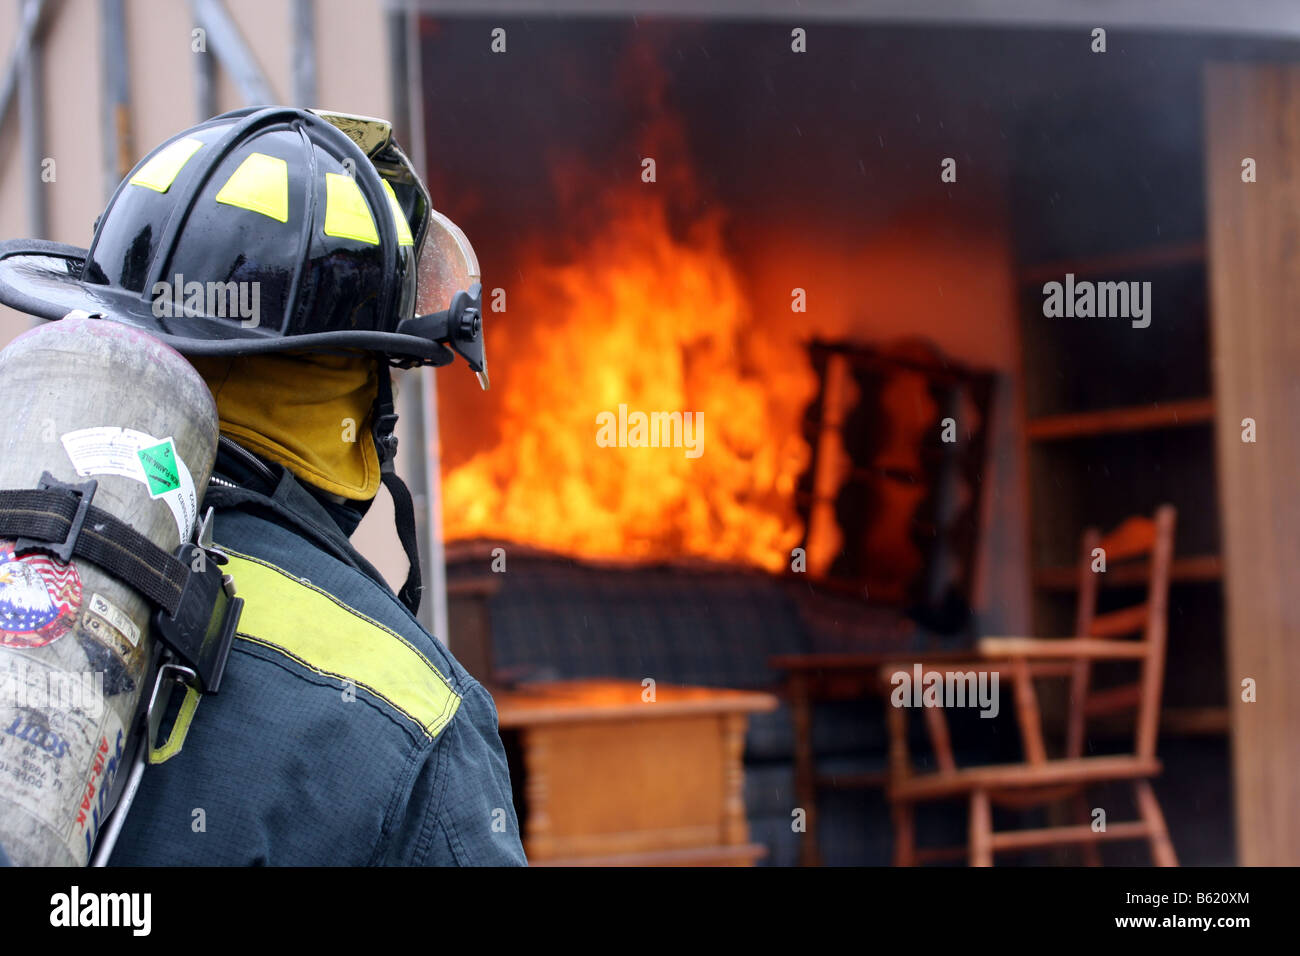 A fire fighter ready to fight a fire in a container full of furniture Stock Photo